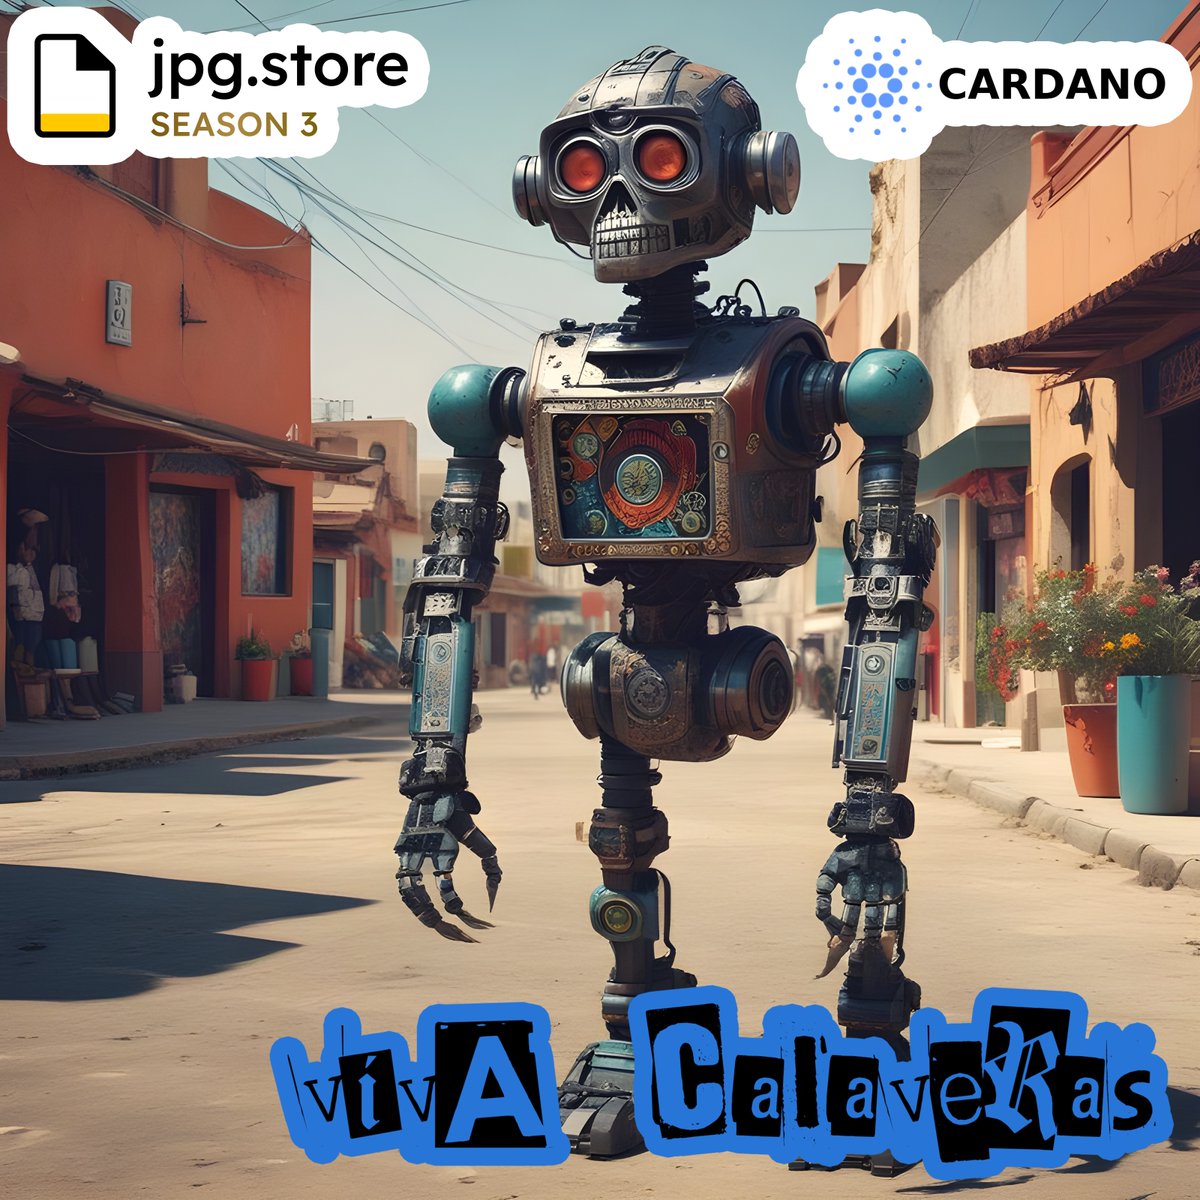 Viva Calaveras on Cardano via jpg.store ! These NFTs can be redeemed for a signed 3D printed K-SCOPES® Trading Card.

Ash
jpg.store/listing/226770…

#cardano #ADA #CardanoNFT #CardanoCommunity #NFT #vivacalaveras #calaveras #kscopes #tradingcards #3dprinting #AI